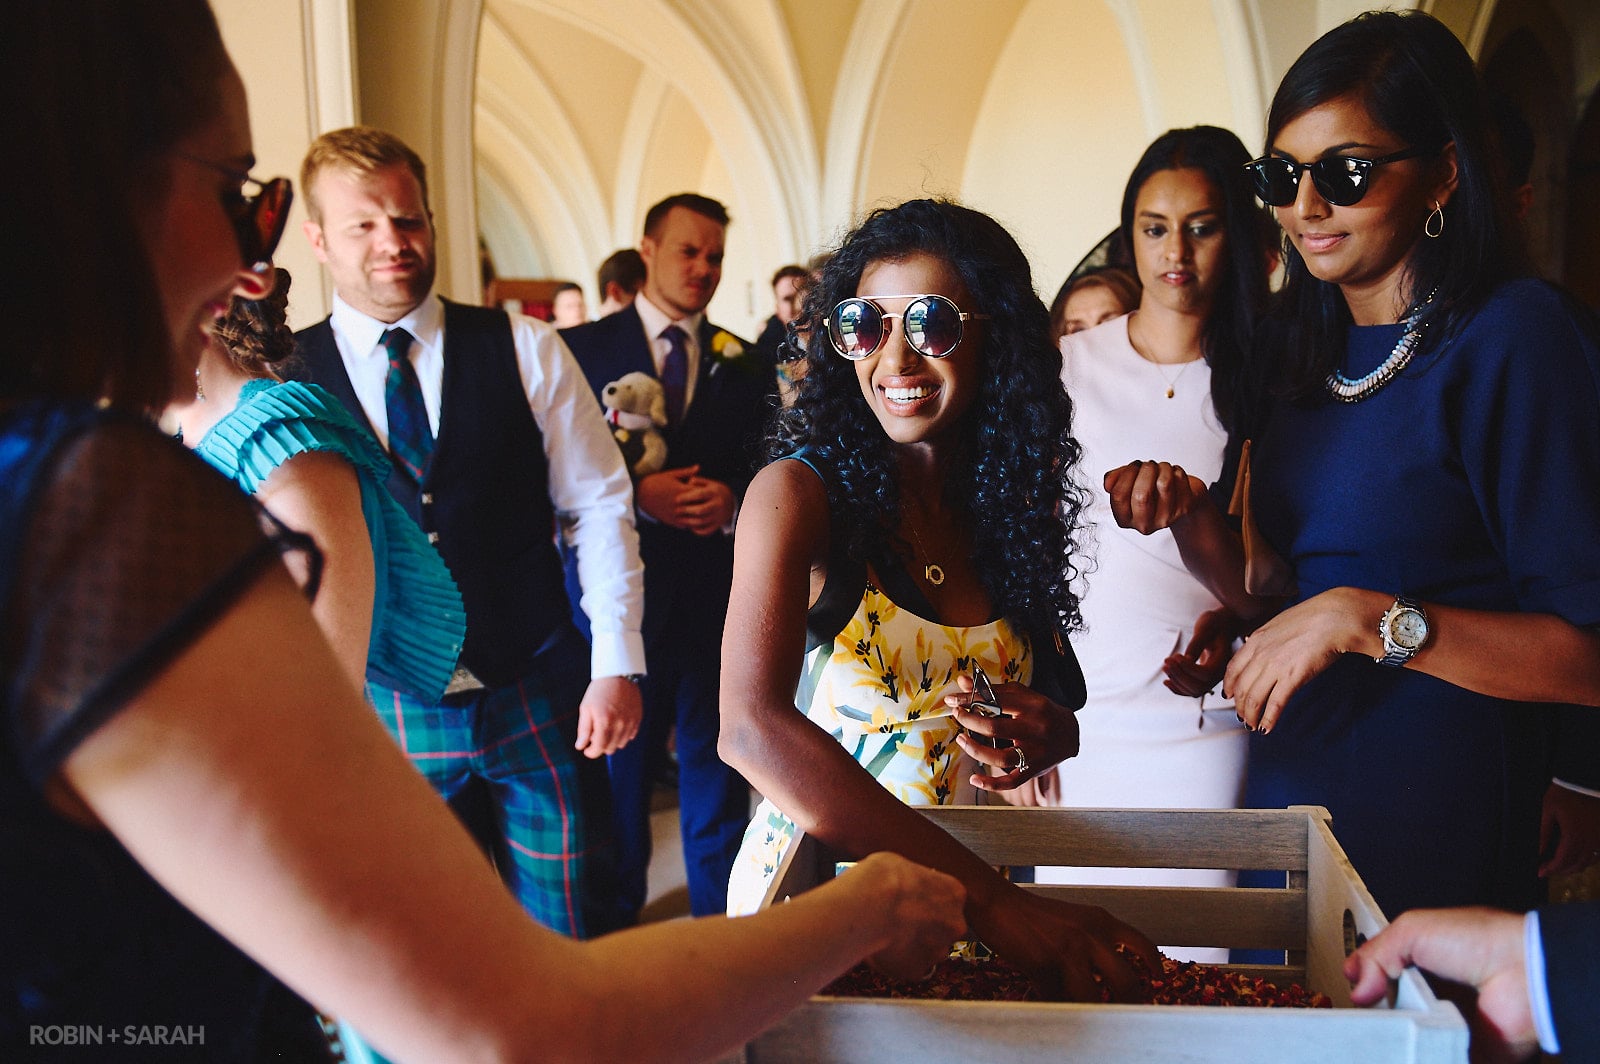 Wedding guests pick up handful of confetti after wedding ceremony